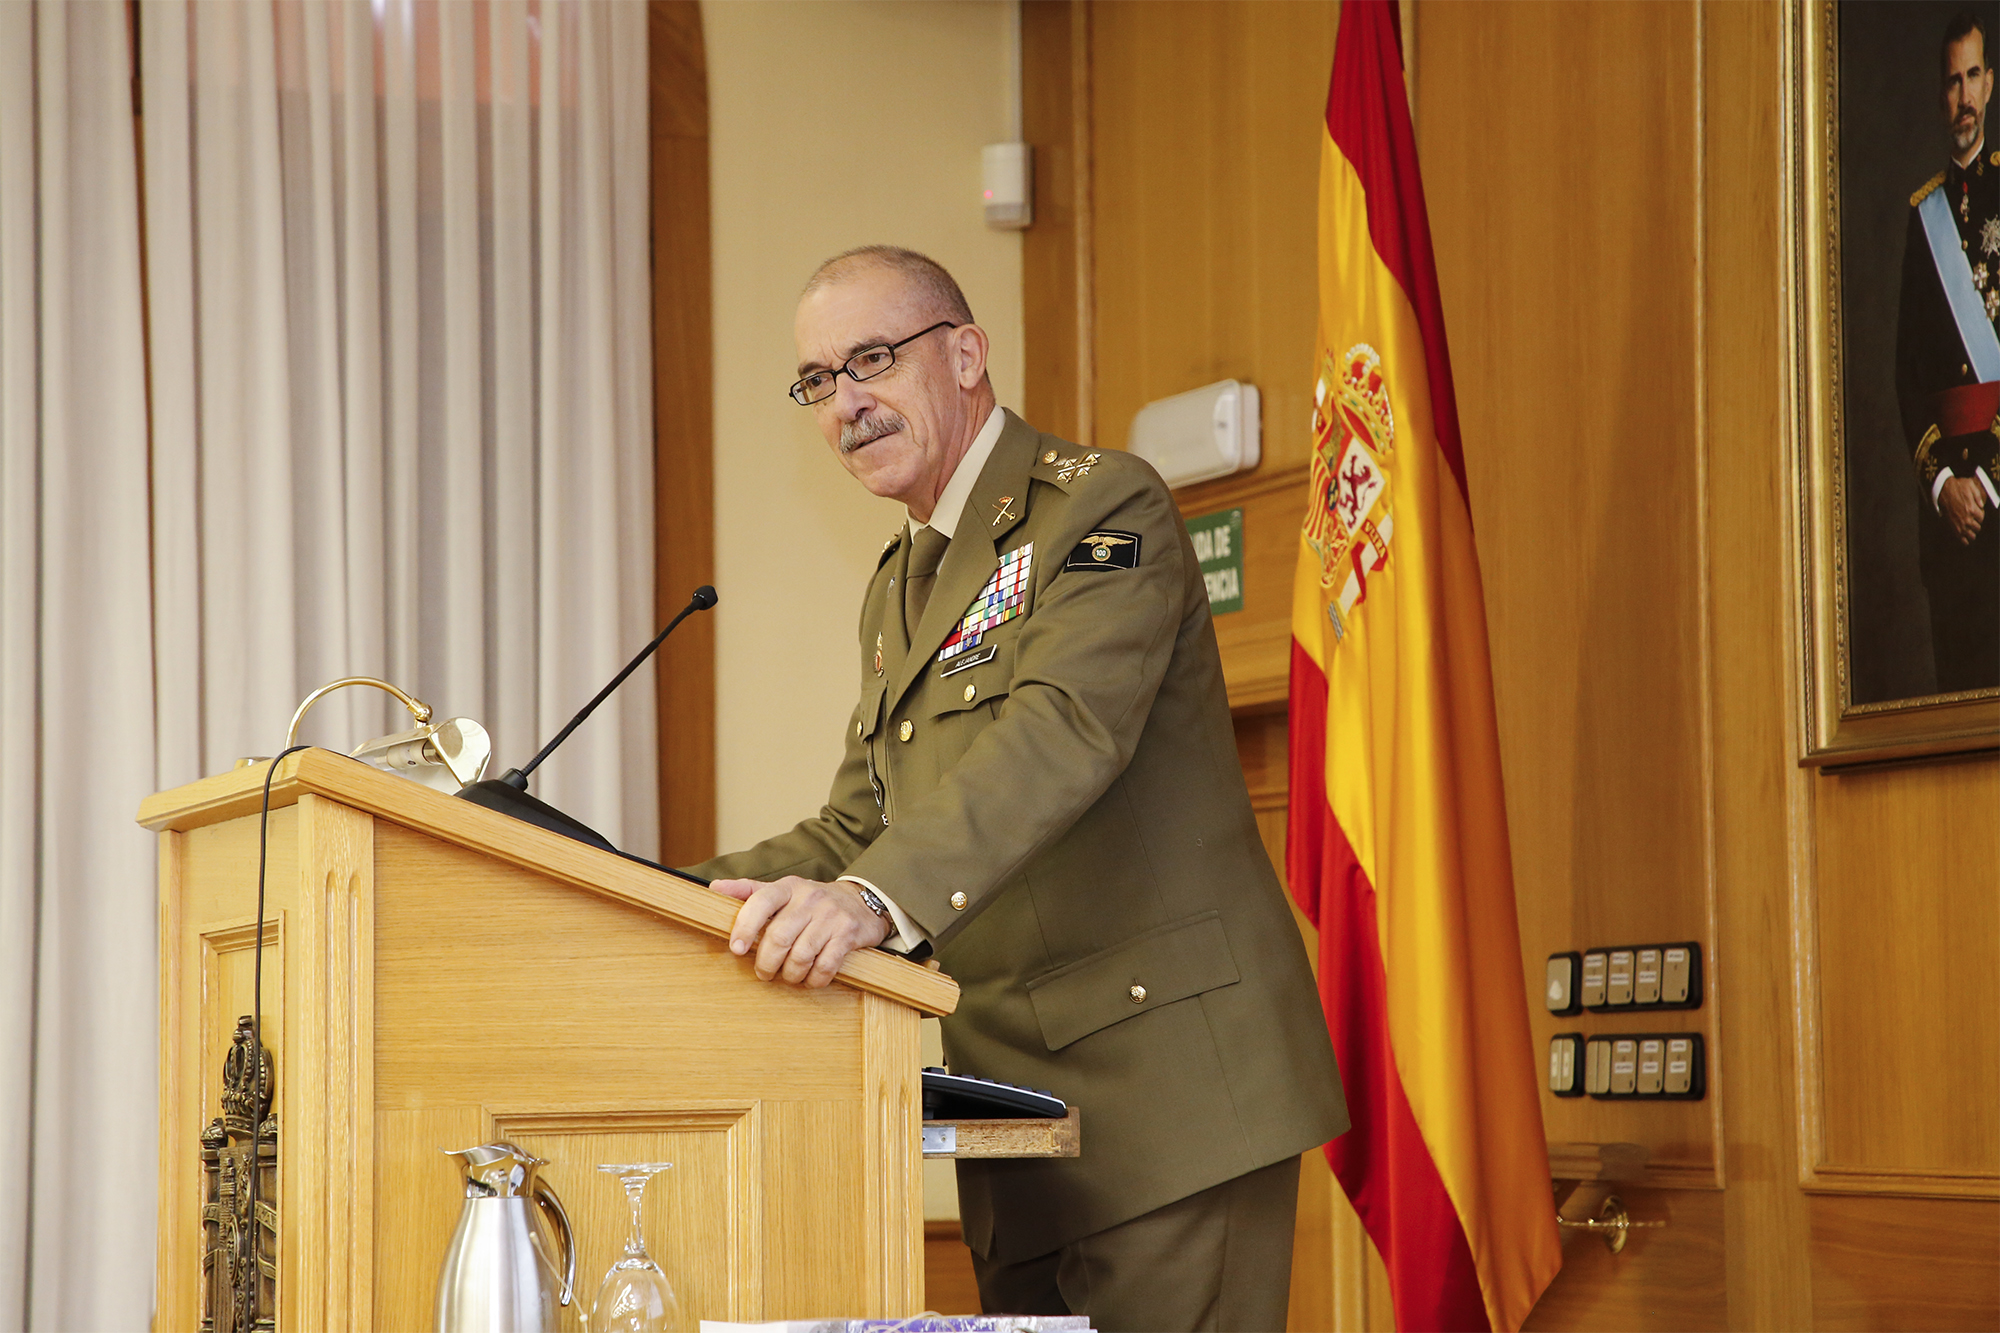 The Chief of the Defence Staff gives a conference for students taking part in the updating course of promotion to commander